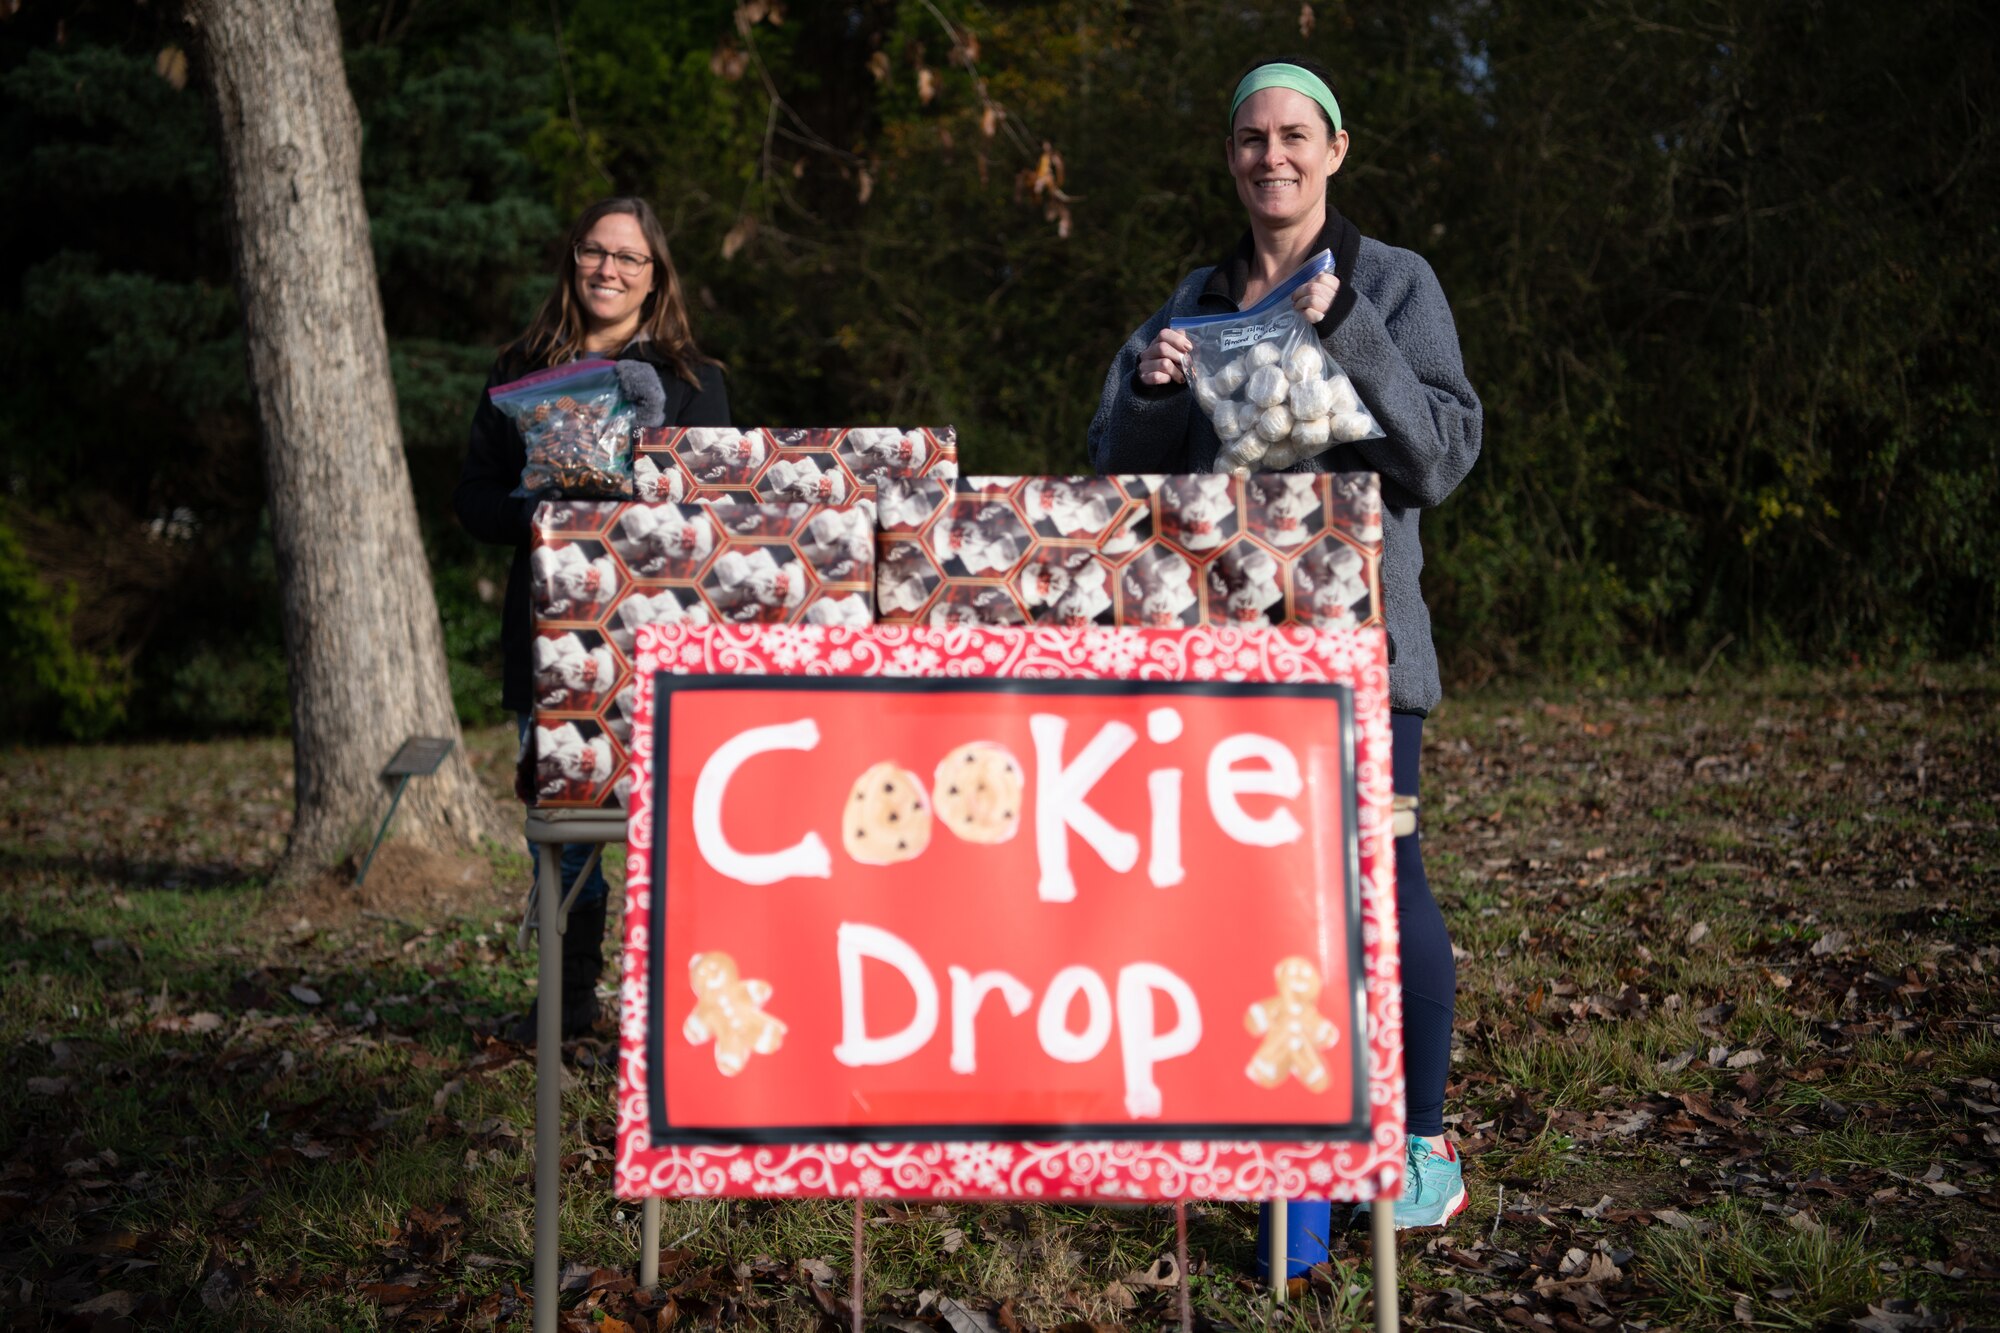 Kristen Morgan and Stephanie Turner, volunteers for the Maxwell-Gunter Holiday Cookie Drive, pose for a photo by the drive-thru cookie drop-off by Montgomery Elementary/Middle School Dec. 16, 2020, on Maxwell Air Force Base, Alabama. Volunteers wore masks and set up their cookie drop-off table outside to mitigate the risks of COVID-19 transmission and ensure the cookie drive could take place safely amid the pandemic.